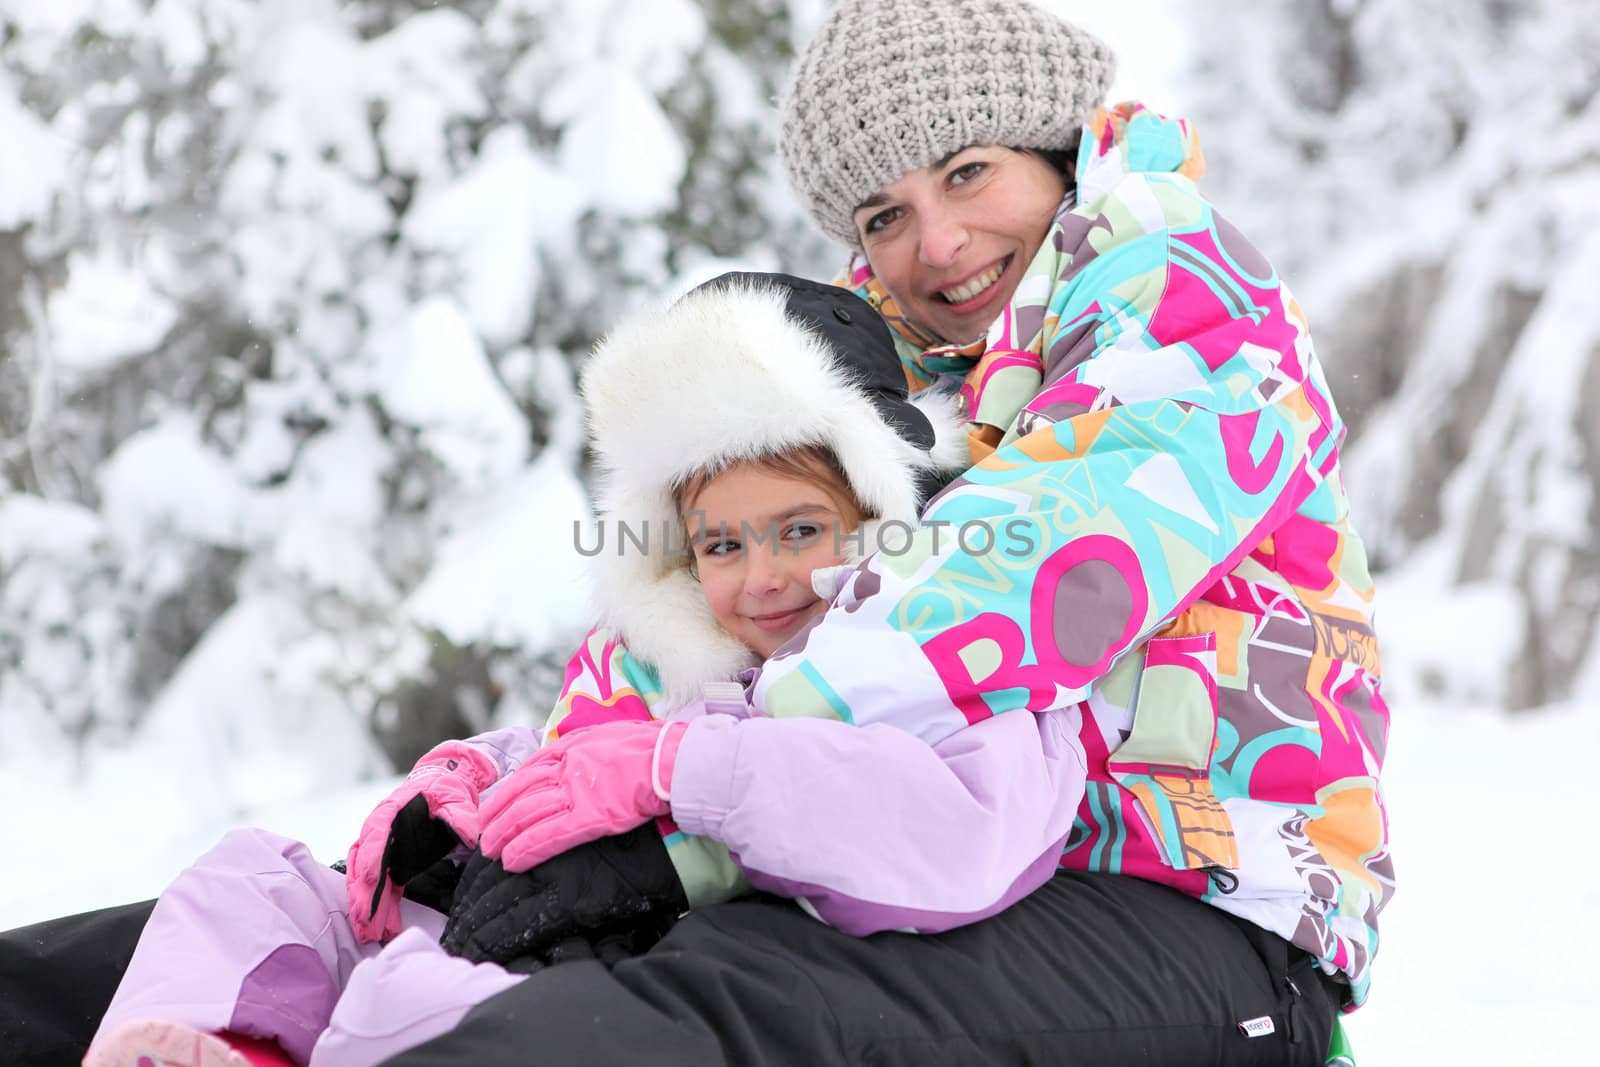 Mother and daughter playing in the snow together by phovoir